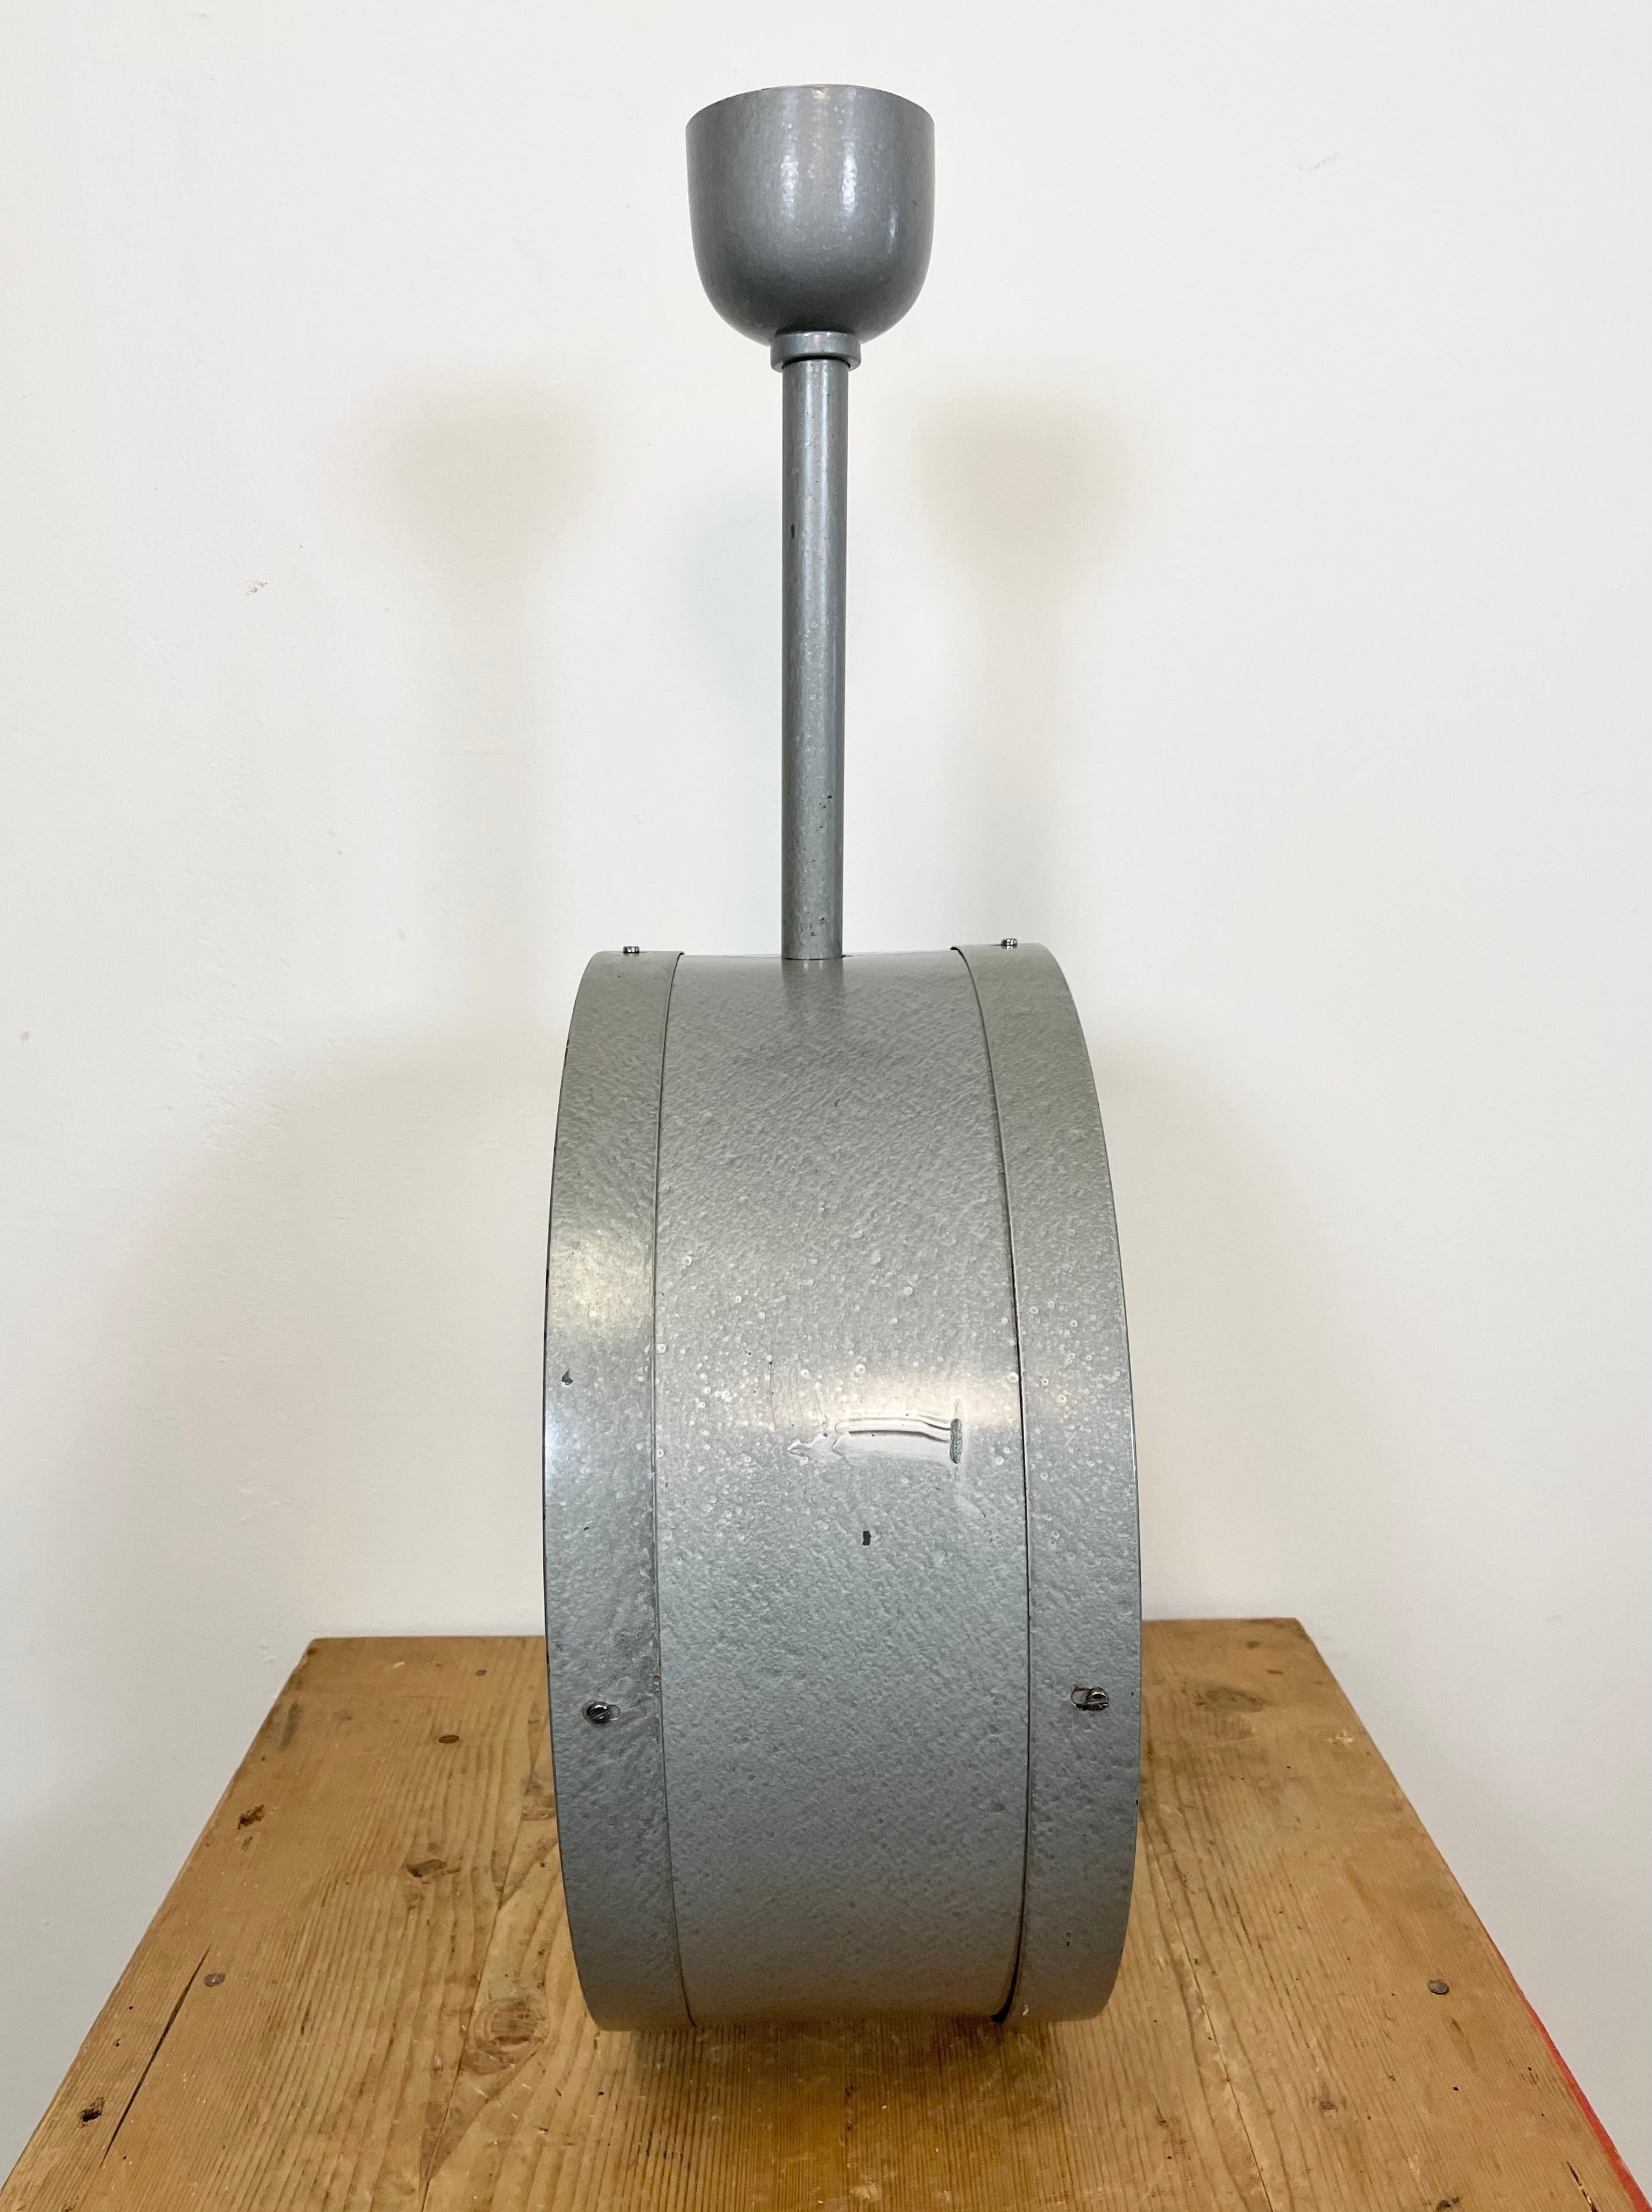 Large Industrial Double Sided Railway or Factory Clock from Pragotron, 1960s 7